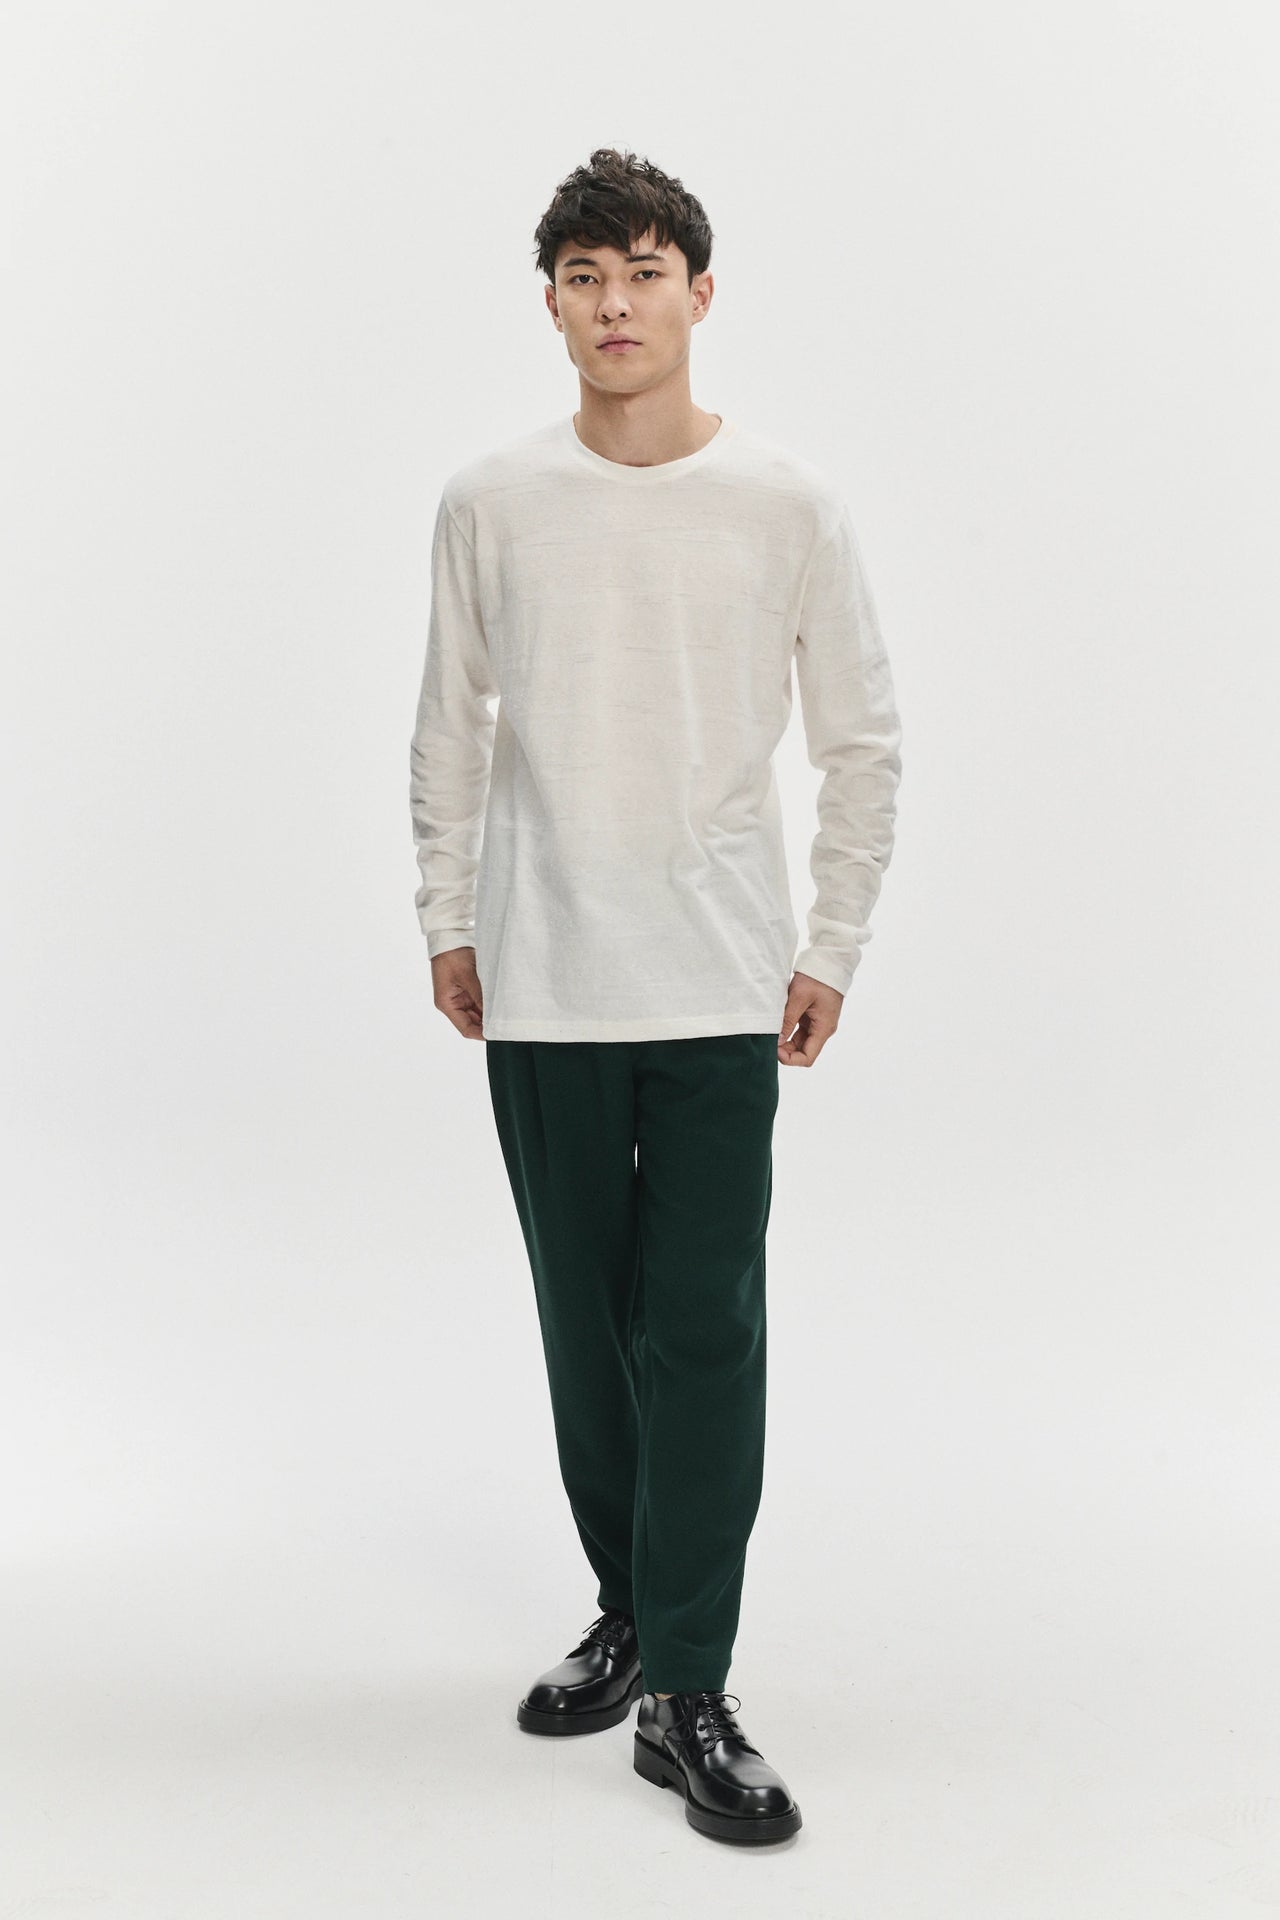 Long Sleeve in a White Japanese Slow-Knit Cotton Jersey